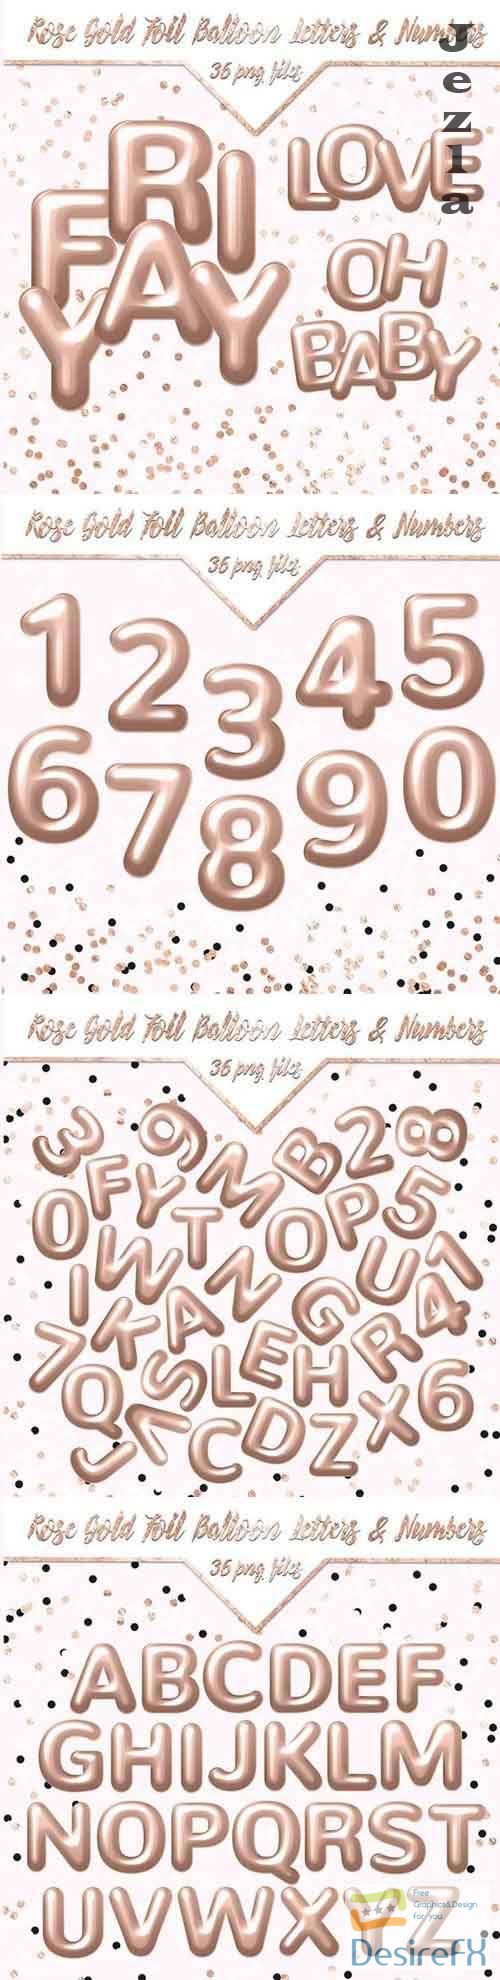 Rose Gold Foil Balloon Letters &amp; Numbers - 1158291